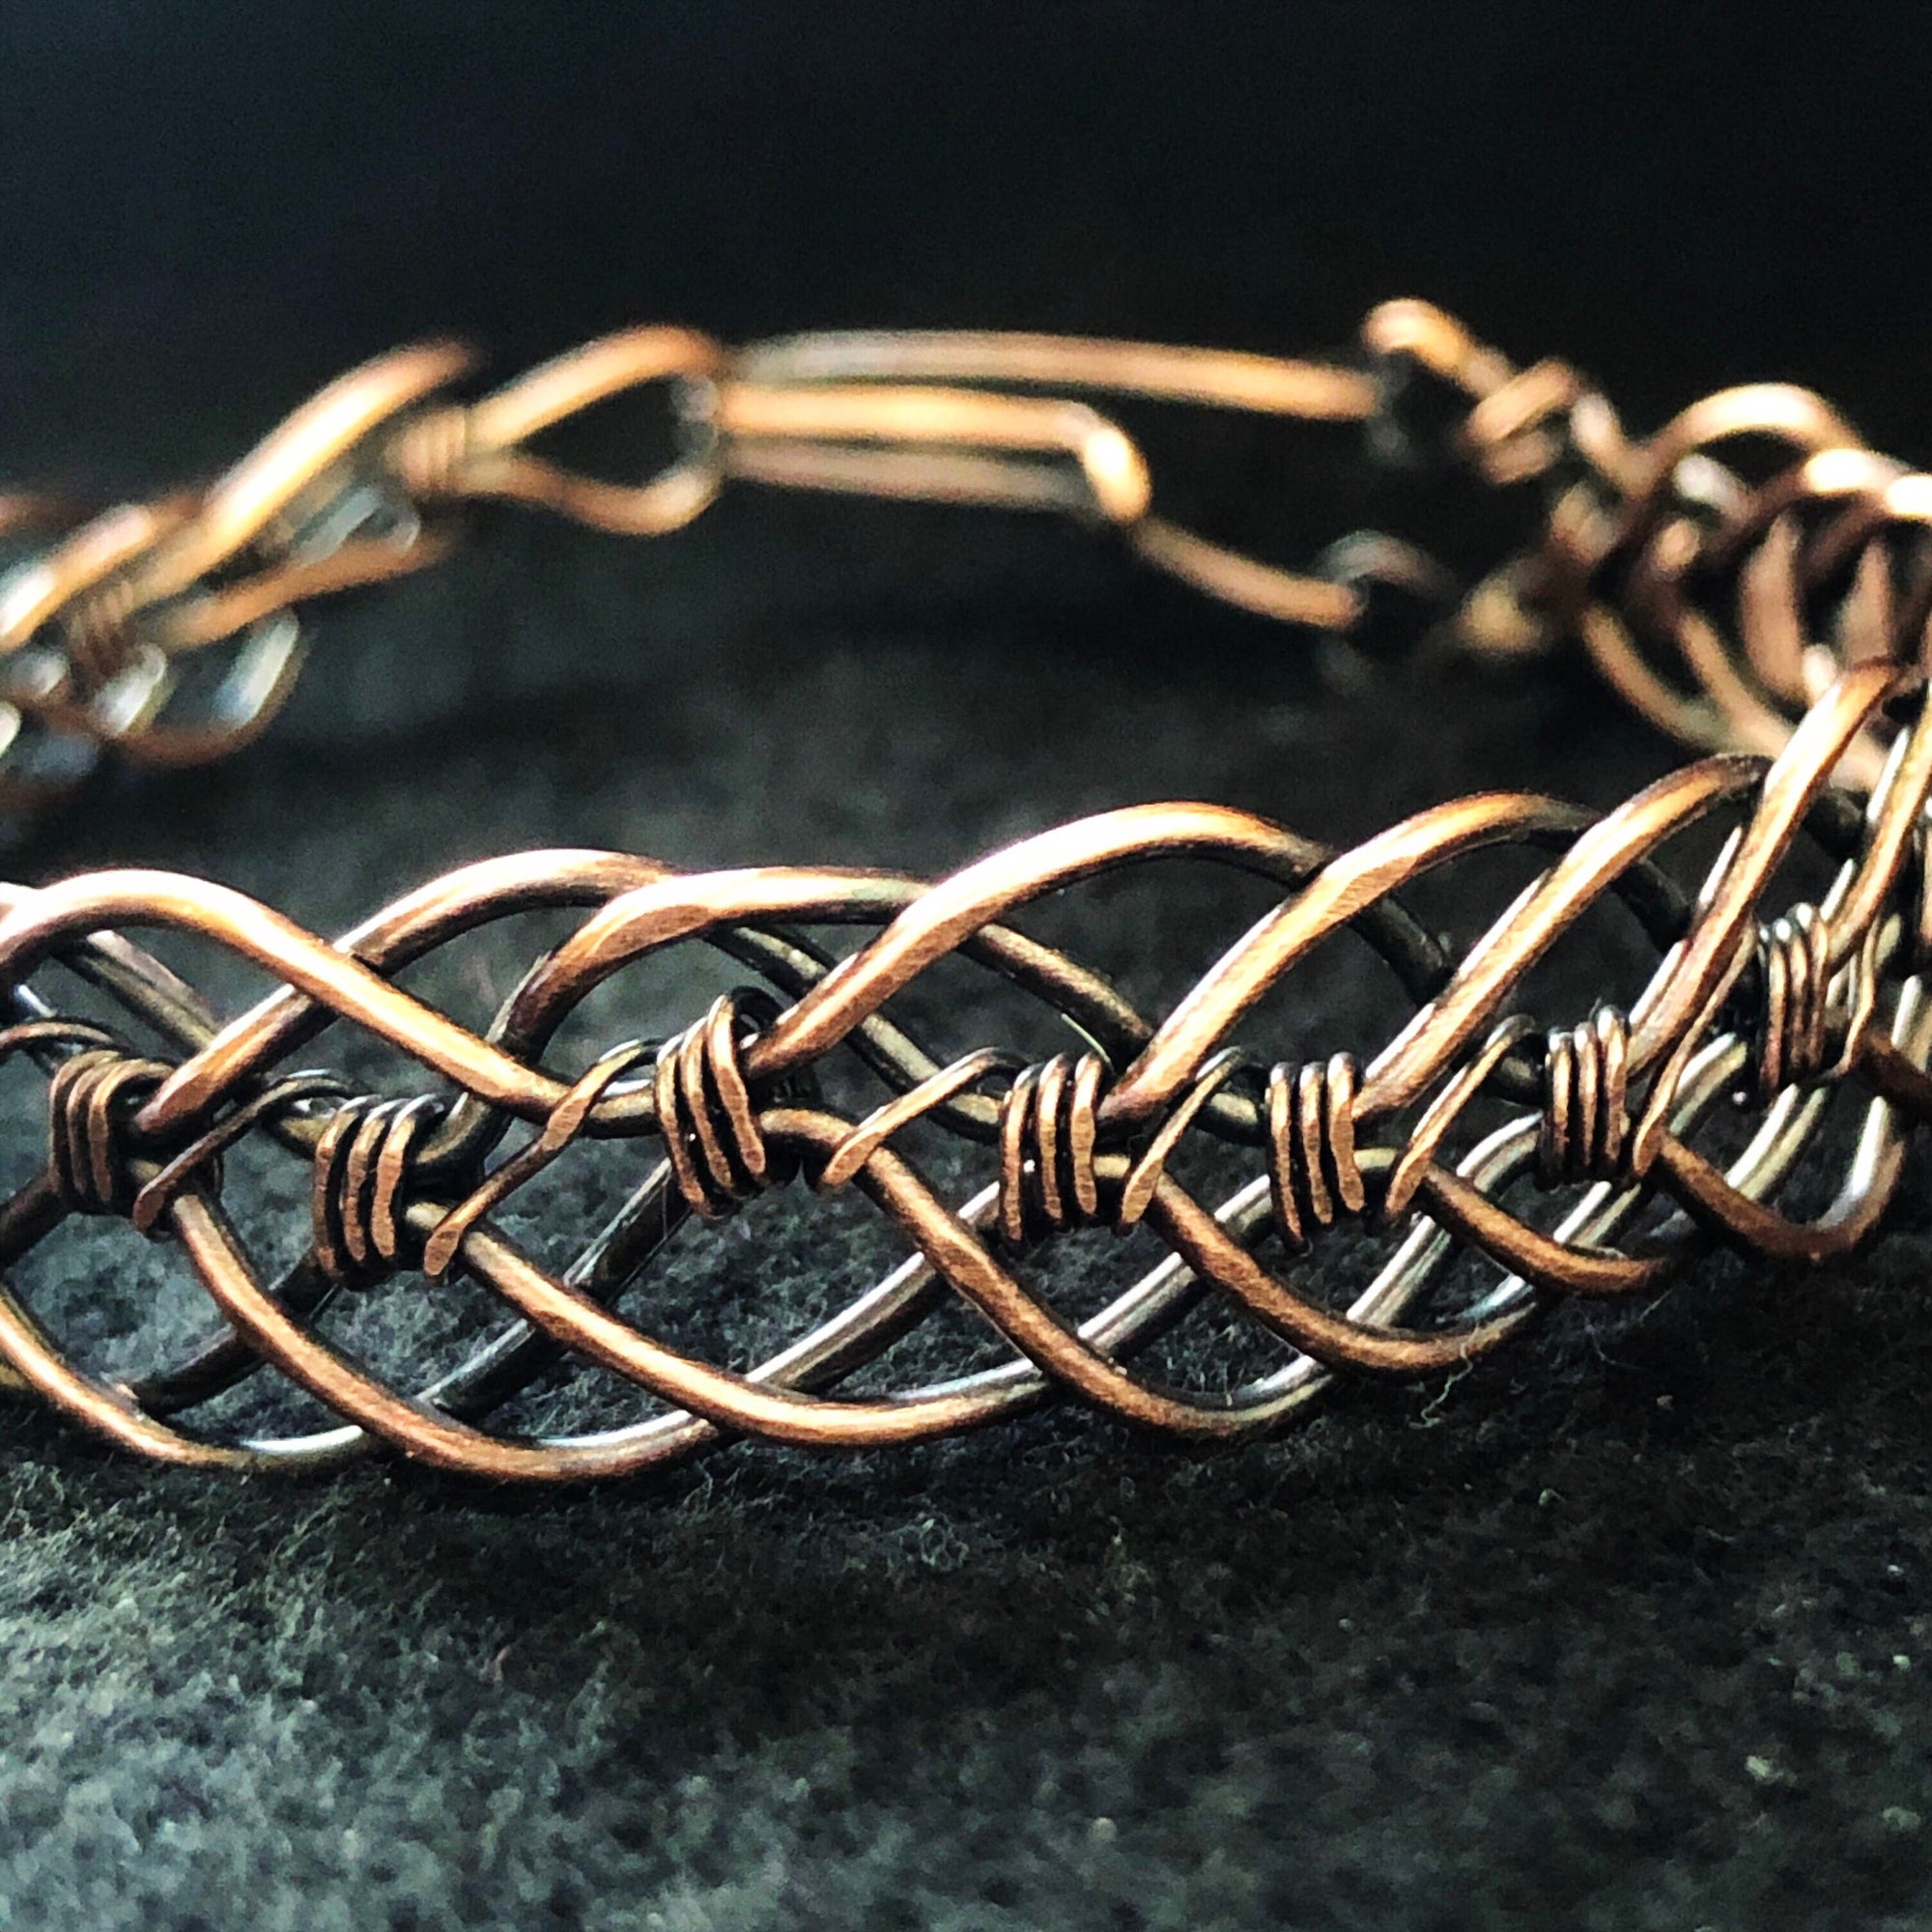 Men’s or women’s unisex copper weave bracelet with or without patina